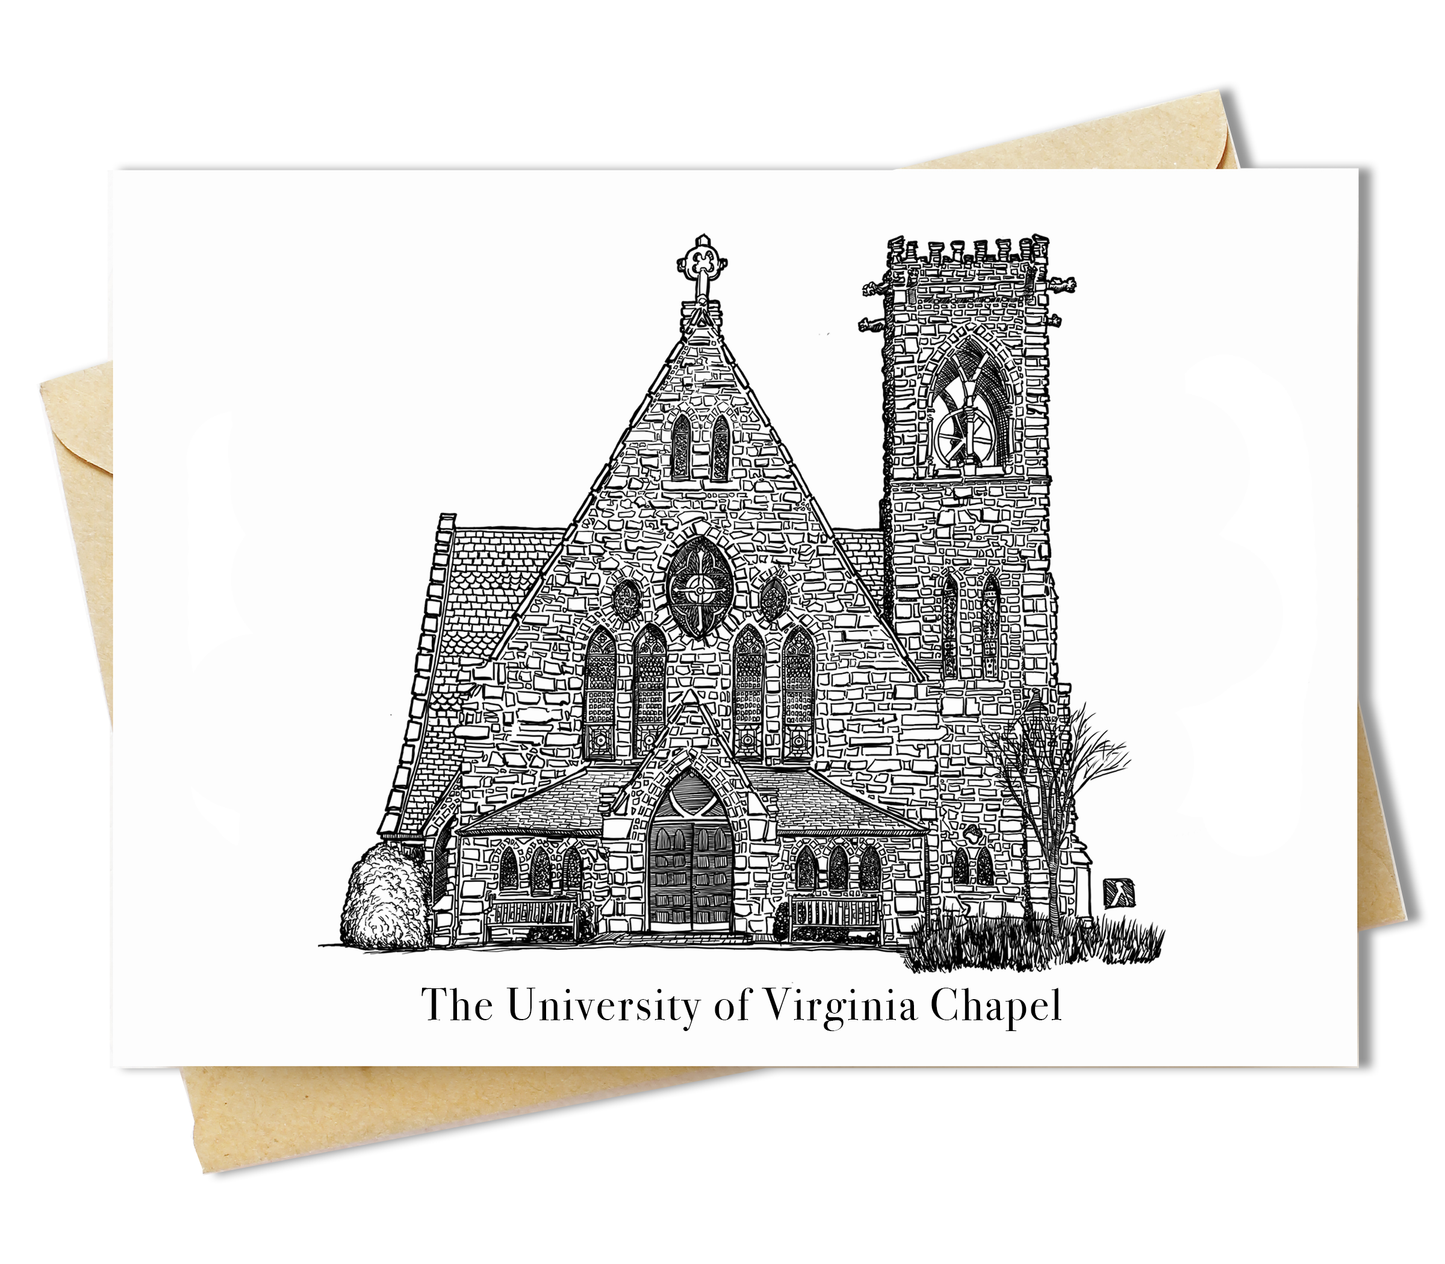 BellavanceInk: Greeting Card With A Pen & Ink Drawing Of The University Of Virginia Chapel 5 x 7 Inches (Officially Licensed)